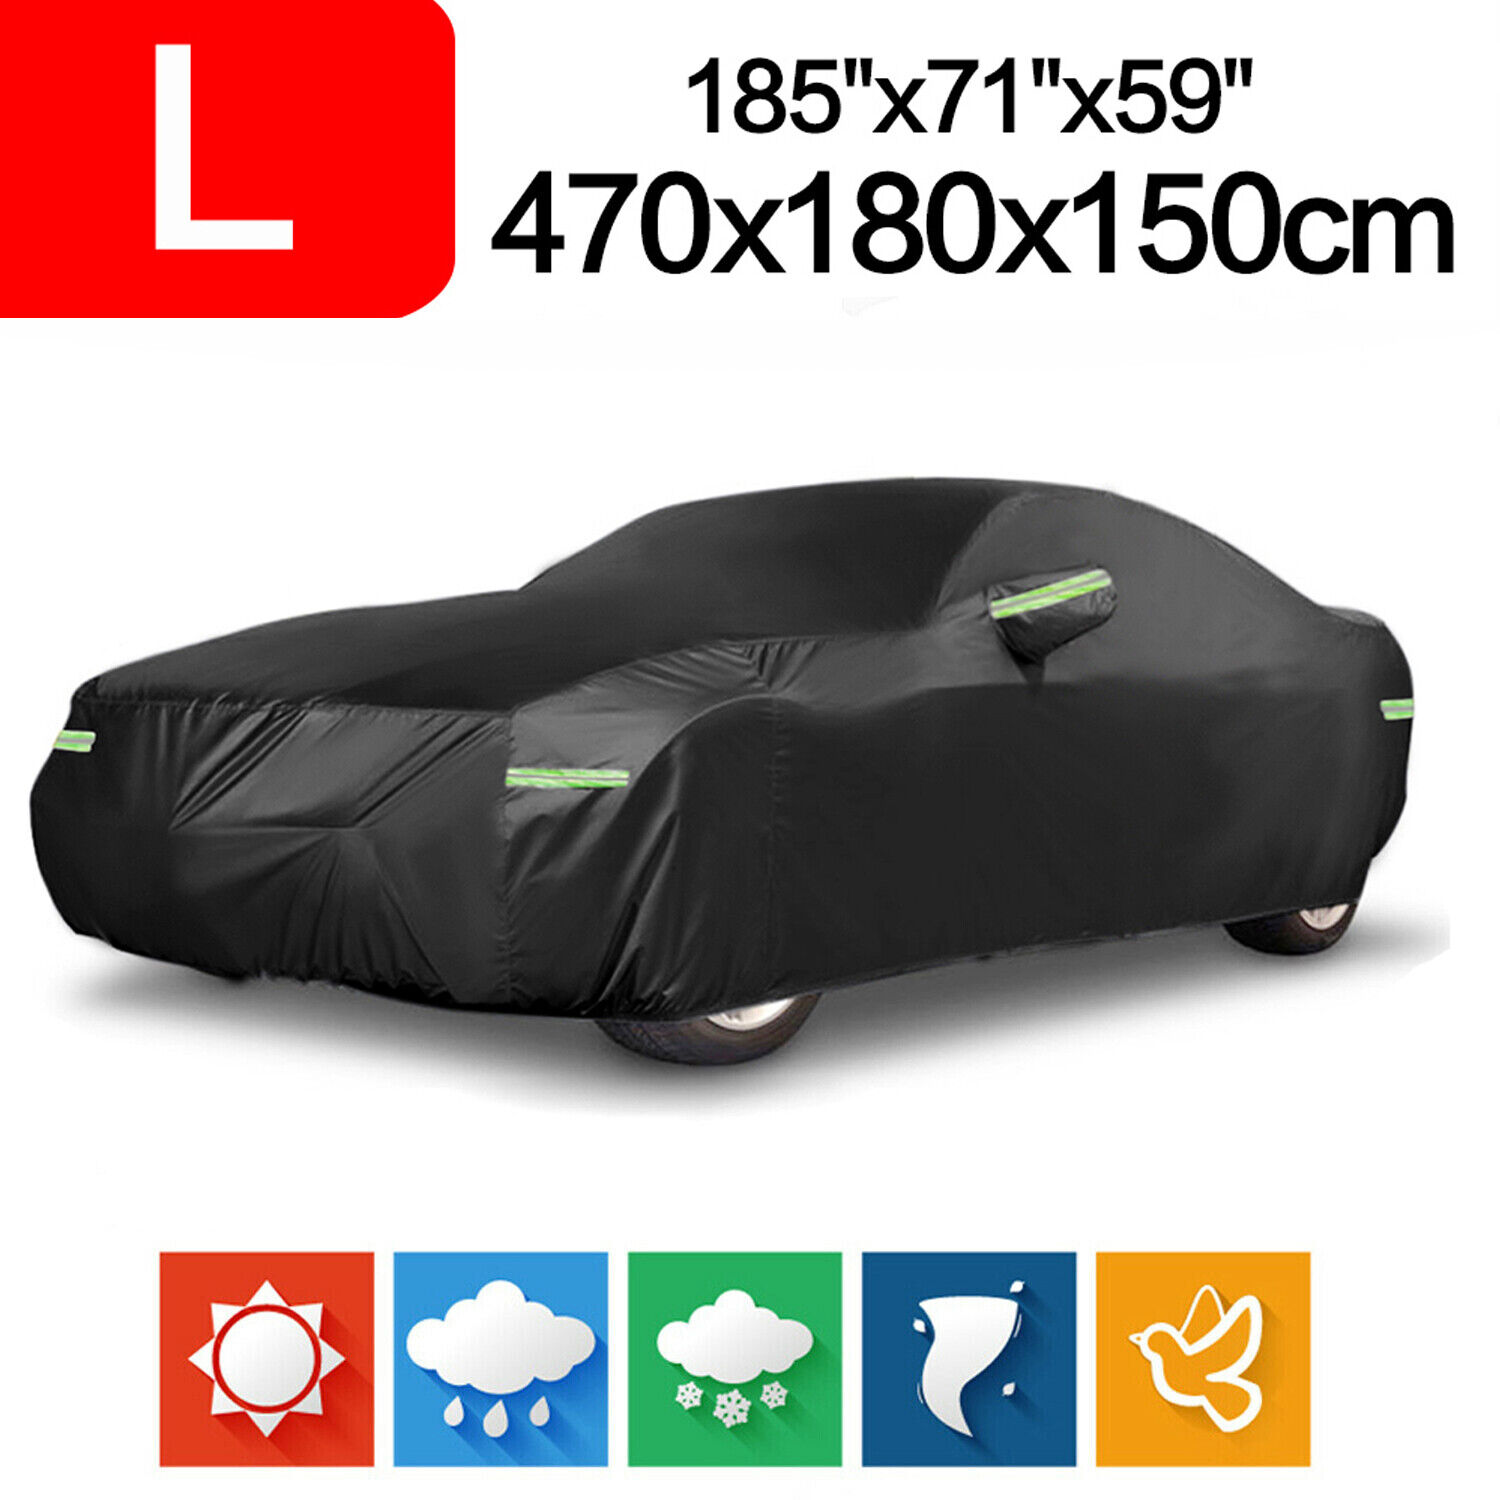 Large Full Car Cover Waterproof Rain Snow Dust Resistant Outdoor UV Protection